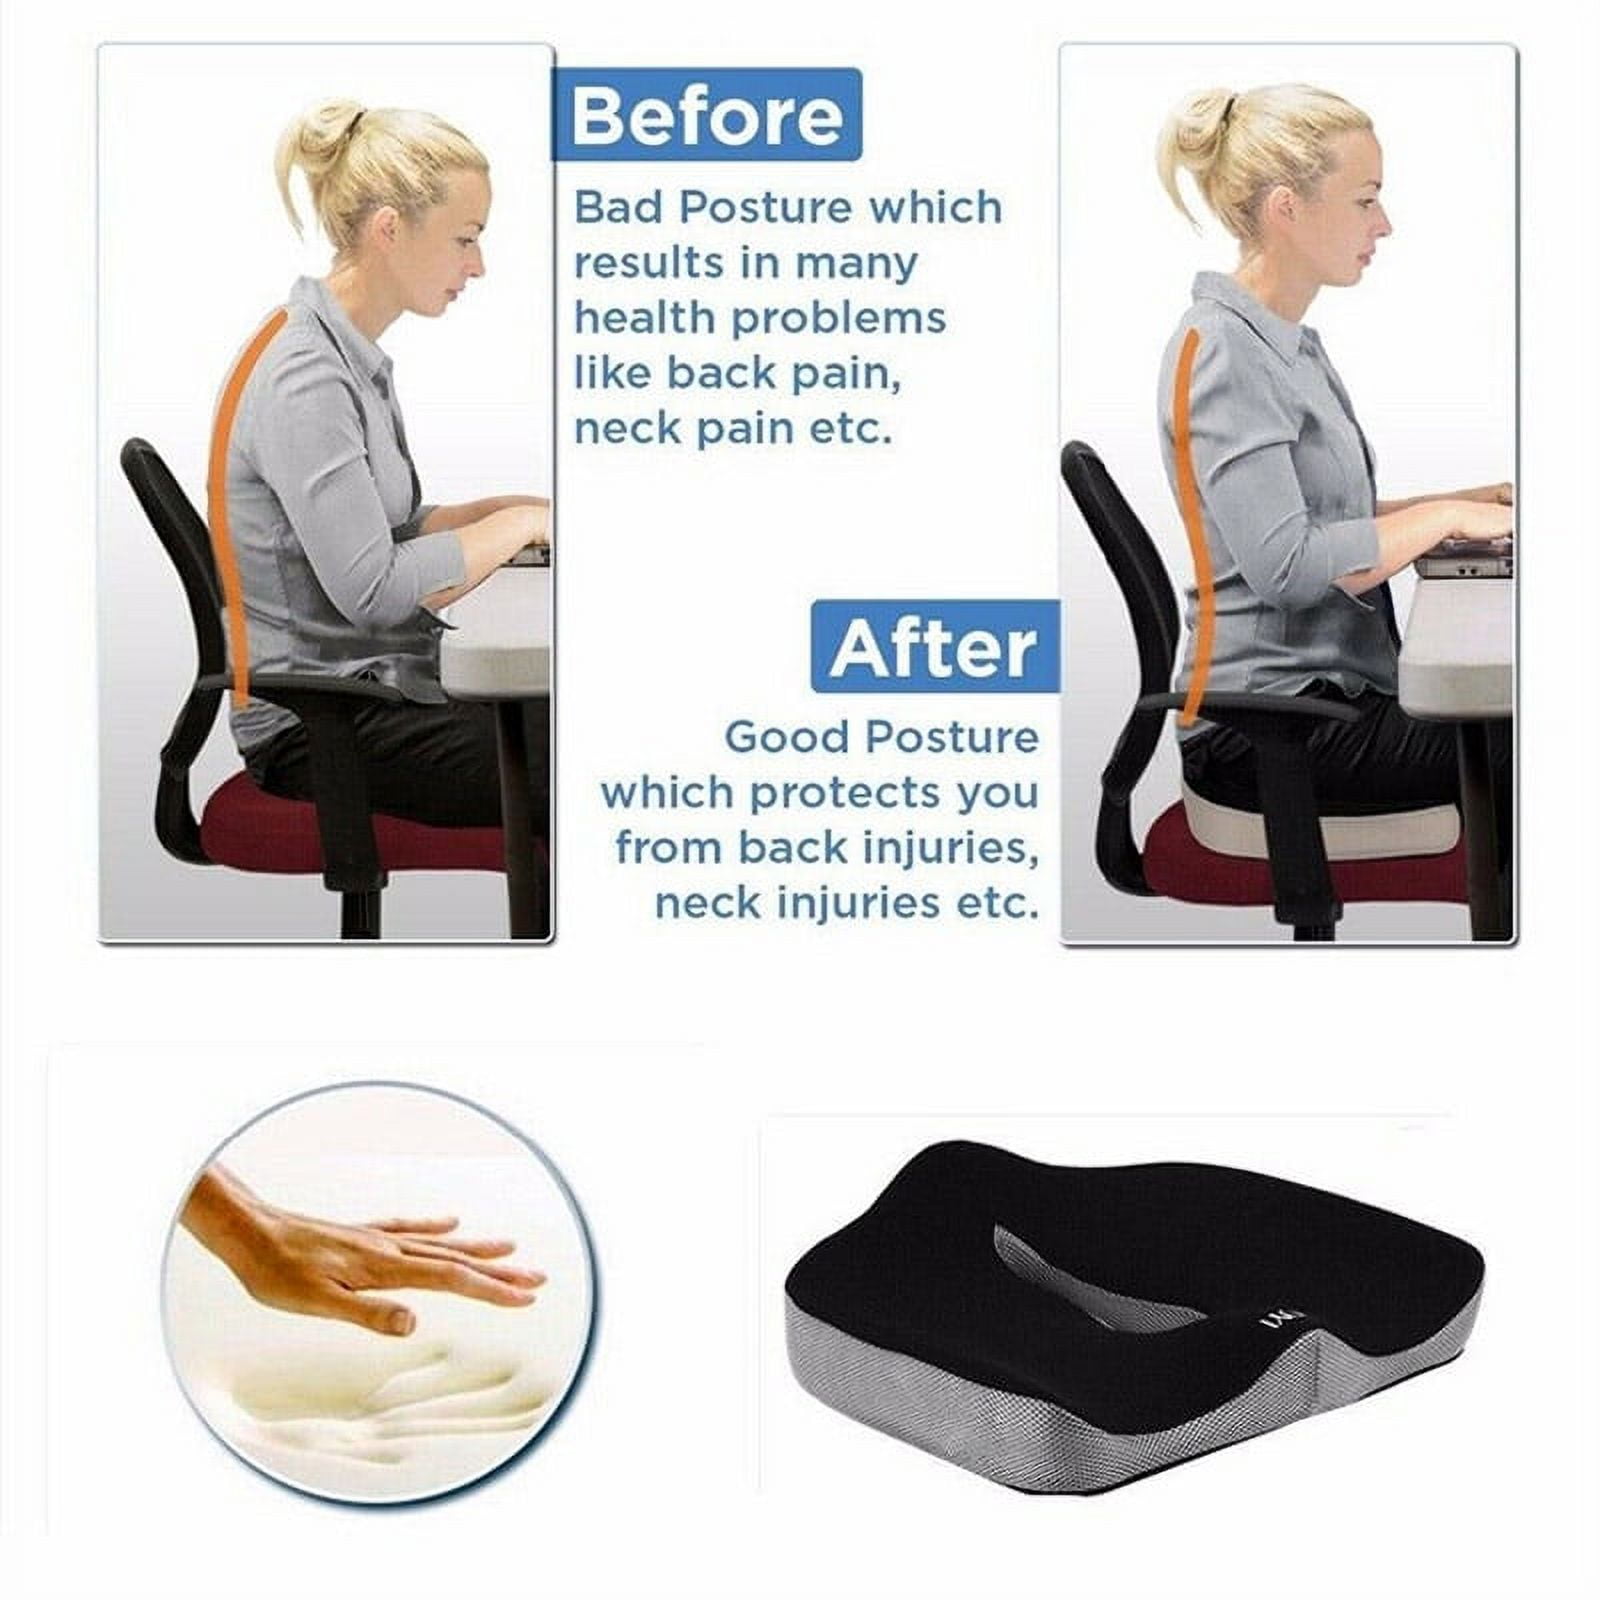 SITTS 35 Support Cushion l Better Posture l Wedge for Sciatica Relief l  Car-Office Chair Cushion-Meditation l Washable Skin l Back Pain R